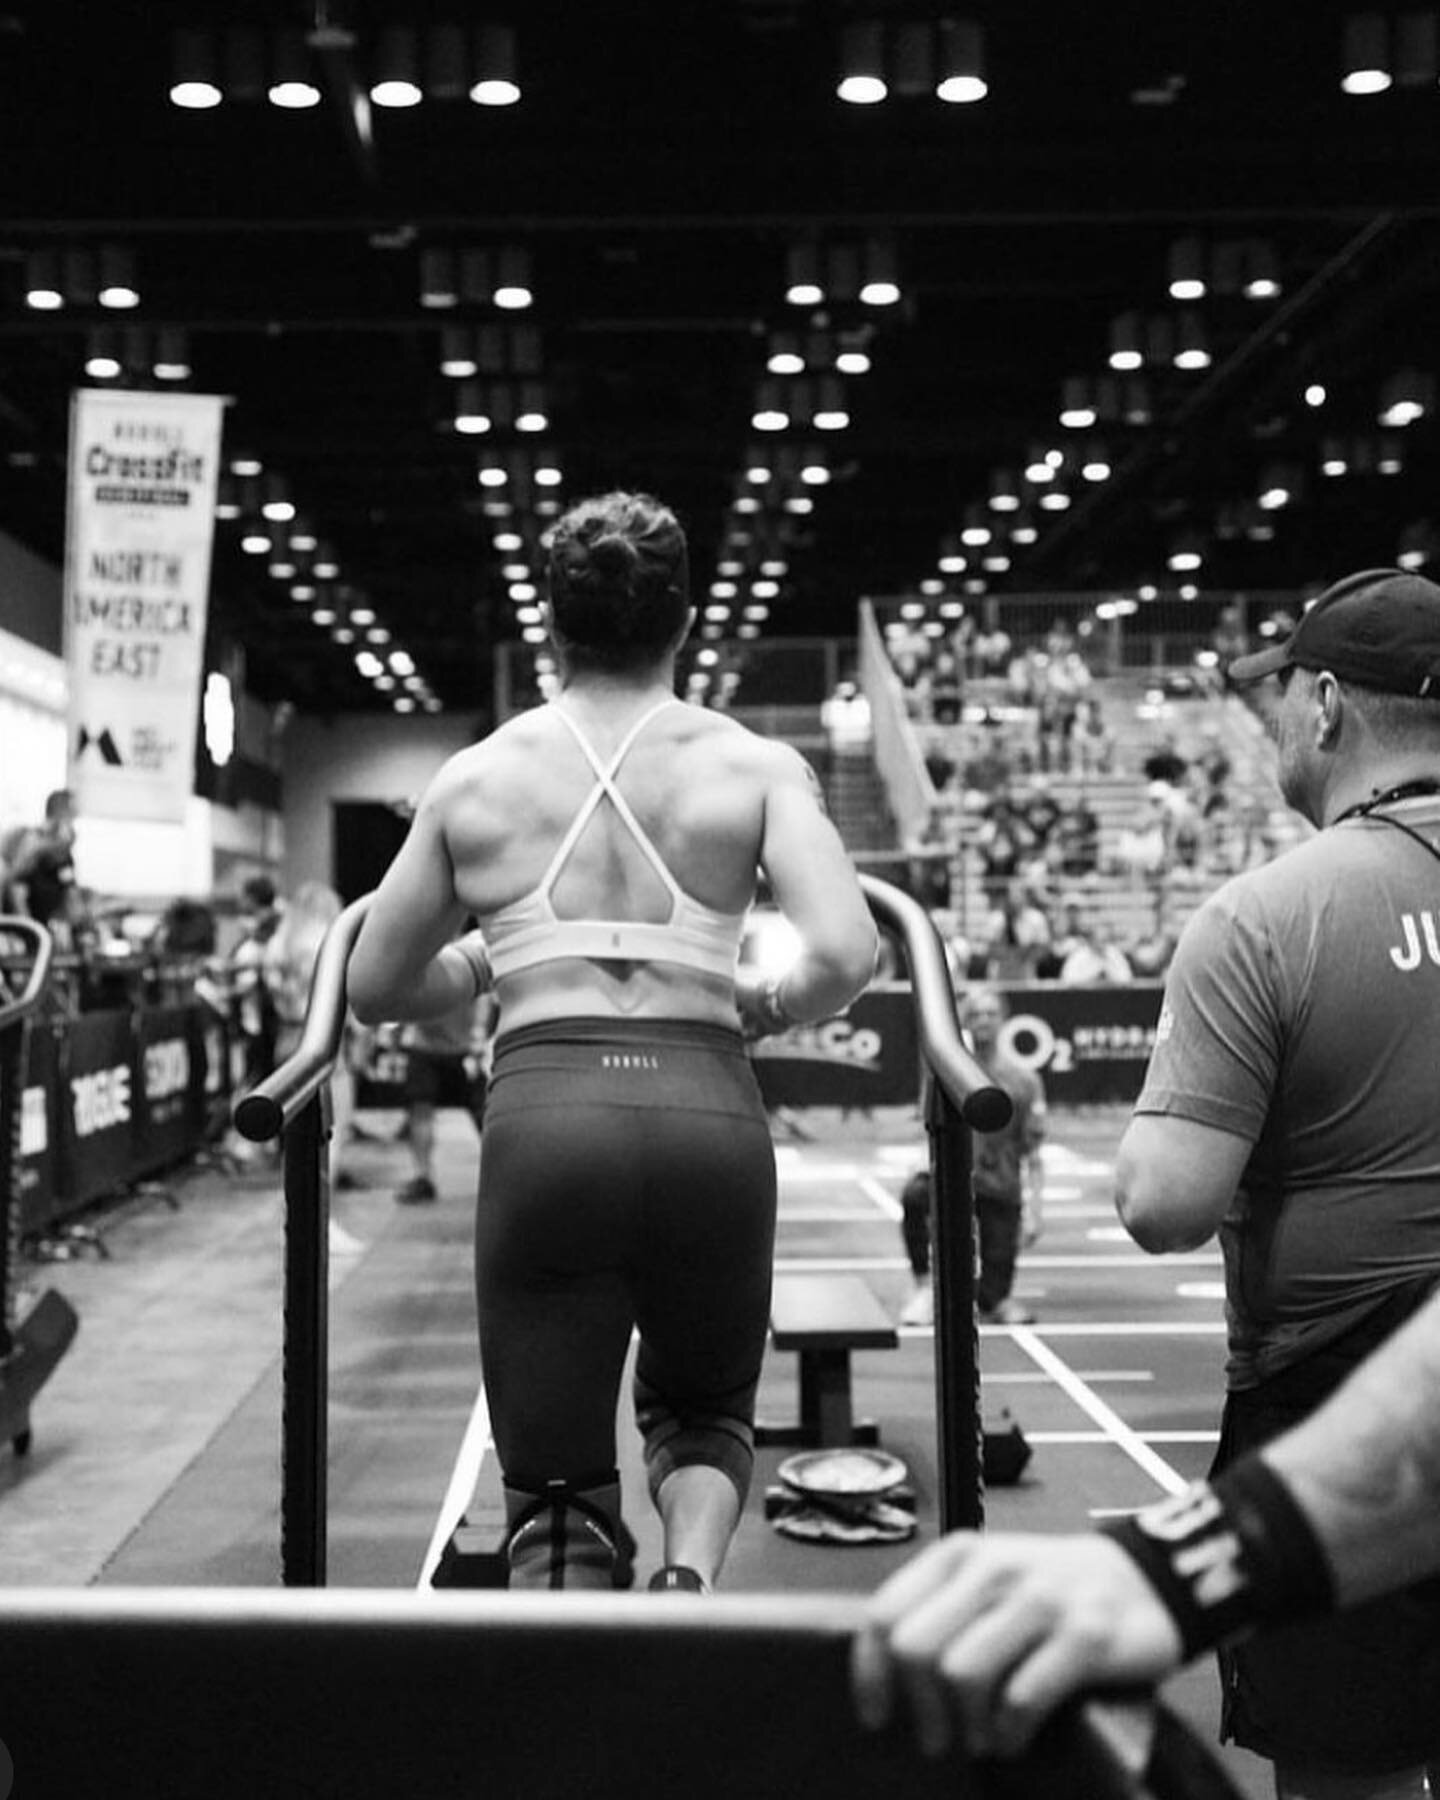 Don&rsquo;t look back, your not going that way. 

GIVE IT ALL YOU&rsquo;VE GOT! 

Day 3️⃣ Emily Sackett @esackett on team CrossFit Southie (white) 

Day 2️⃣ for Aurora Vellante @aurorav1313!!! 

Let&rsquo;s GO!!!!